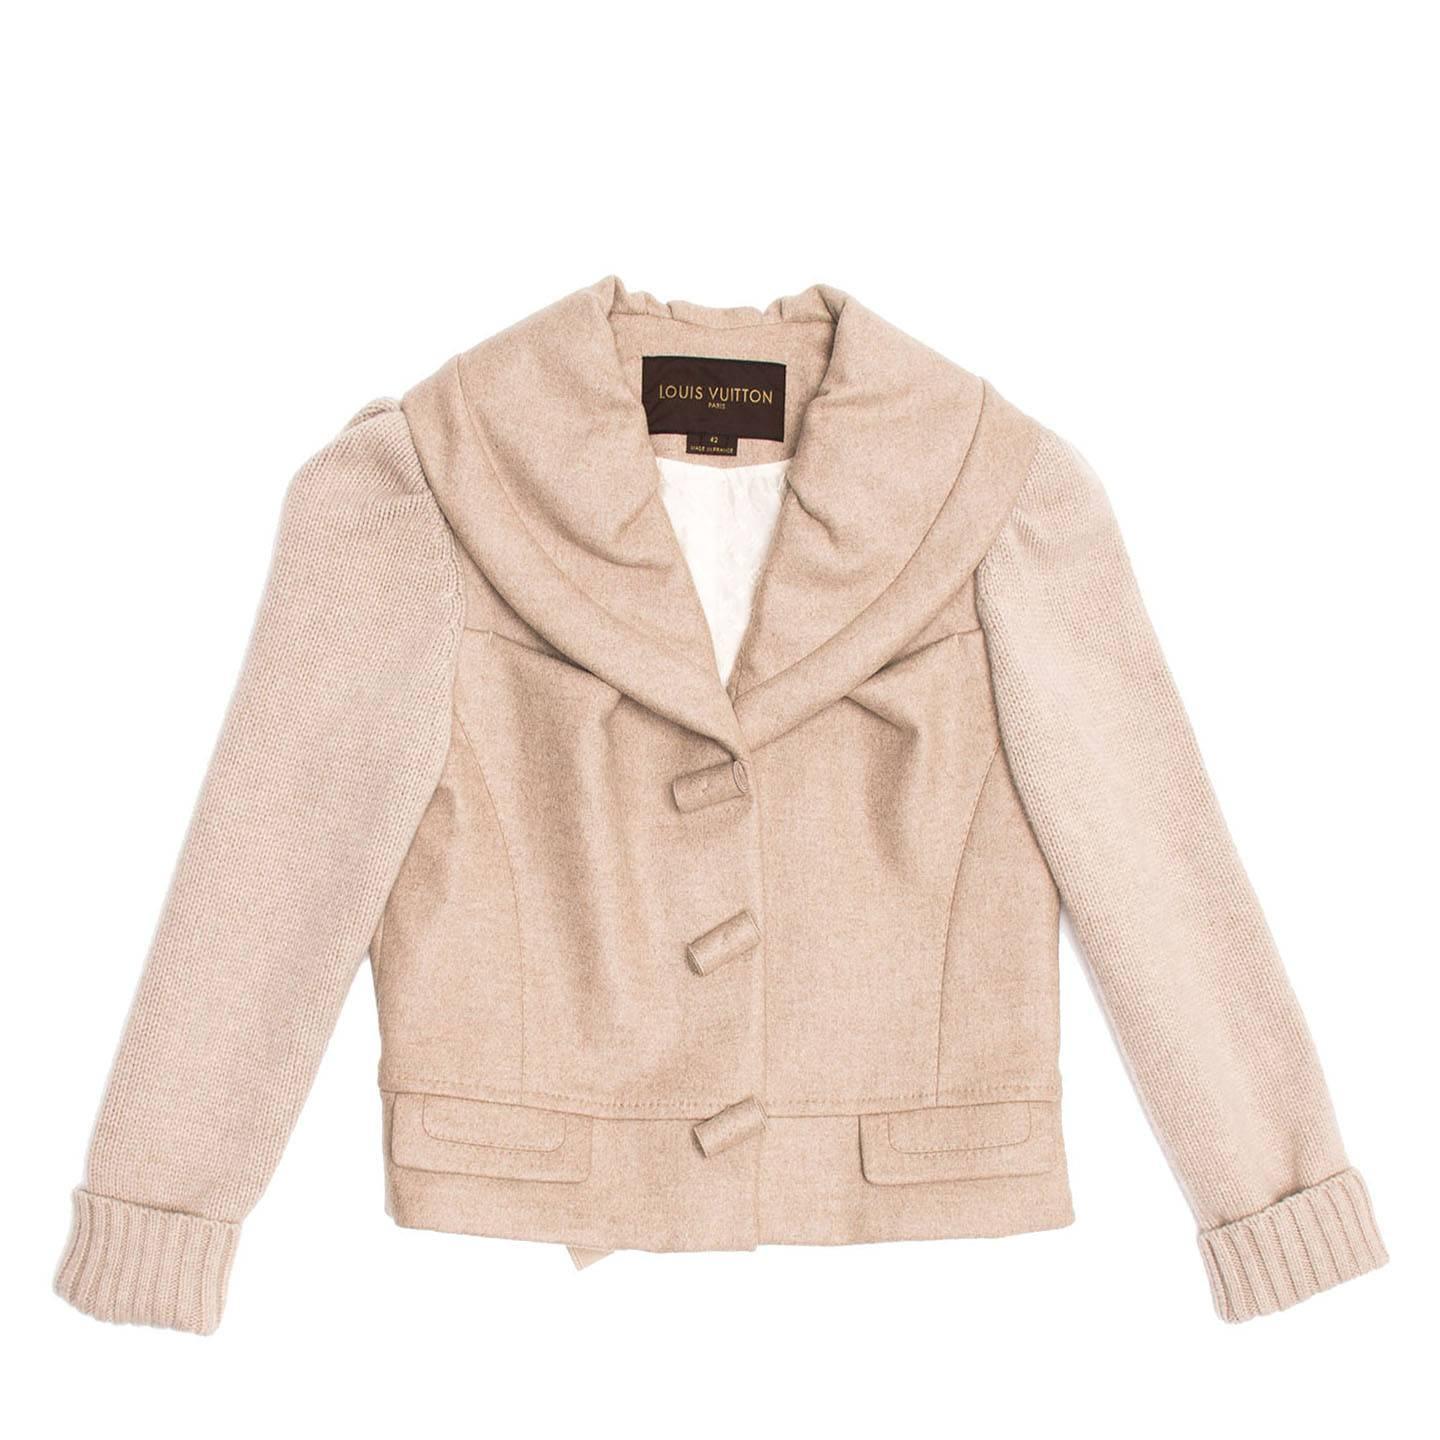 Ecru waist length cashmere jacket with knit sleeves and shawl collar. Cashmere toggle style buttons fasten the front opening and two squared pockets with flaps sit at waist.The back hem width is adjustable with a ribbon tied inside the jacket and